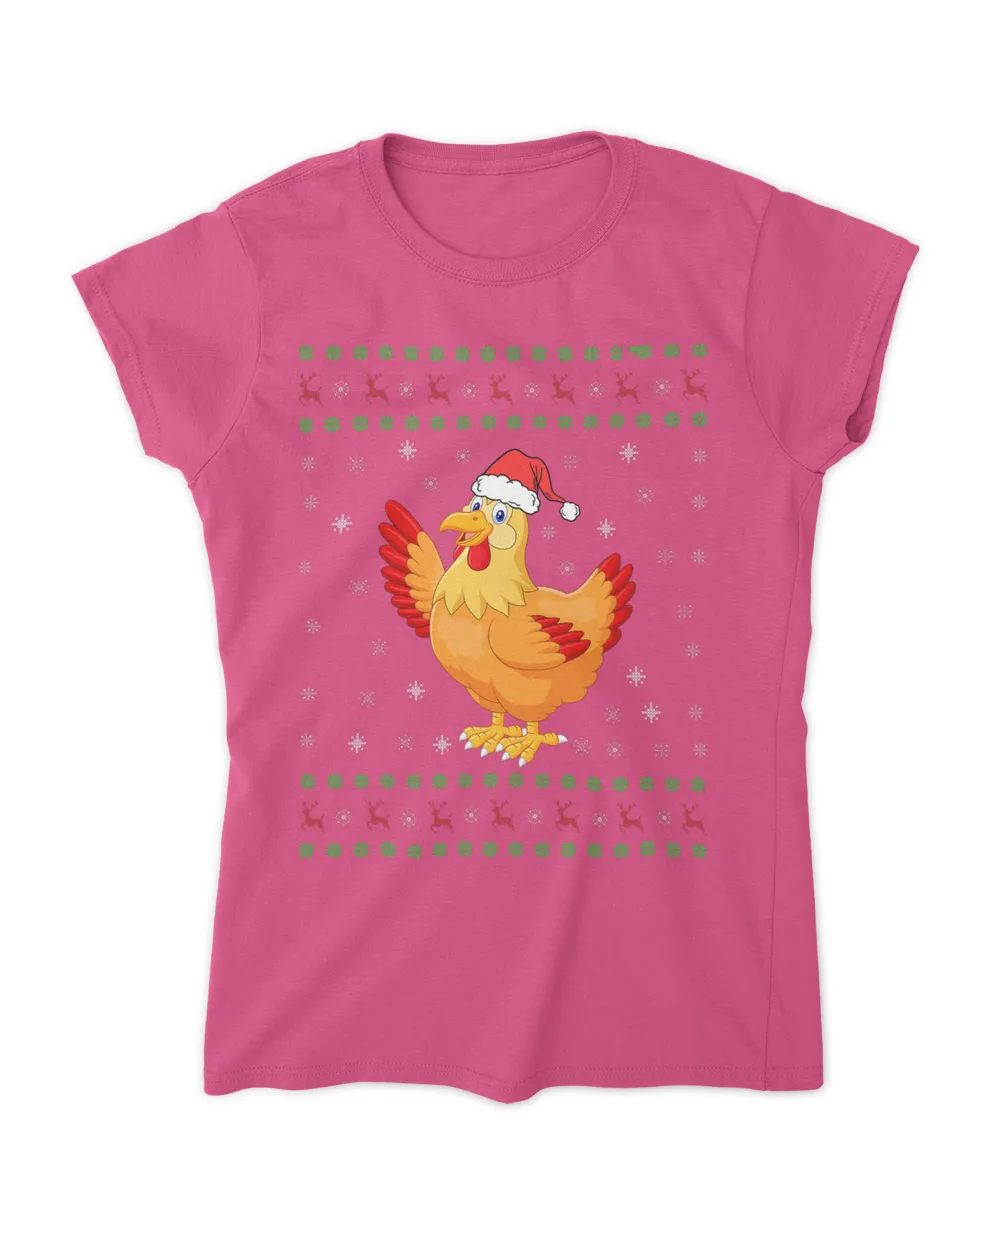 Ugly Xmas Chicken Graphic Funny Ugly Sweater Christmas